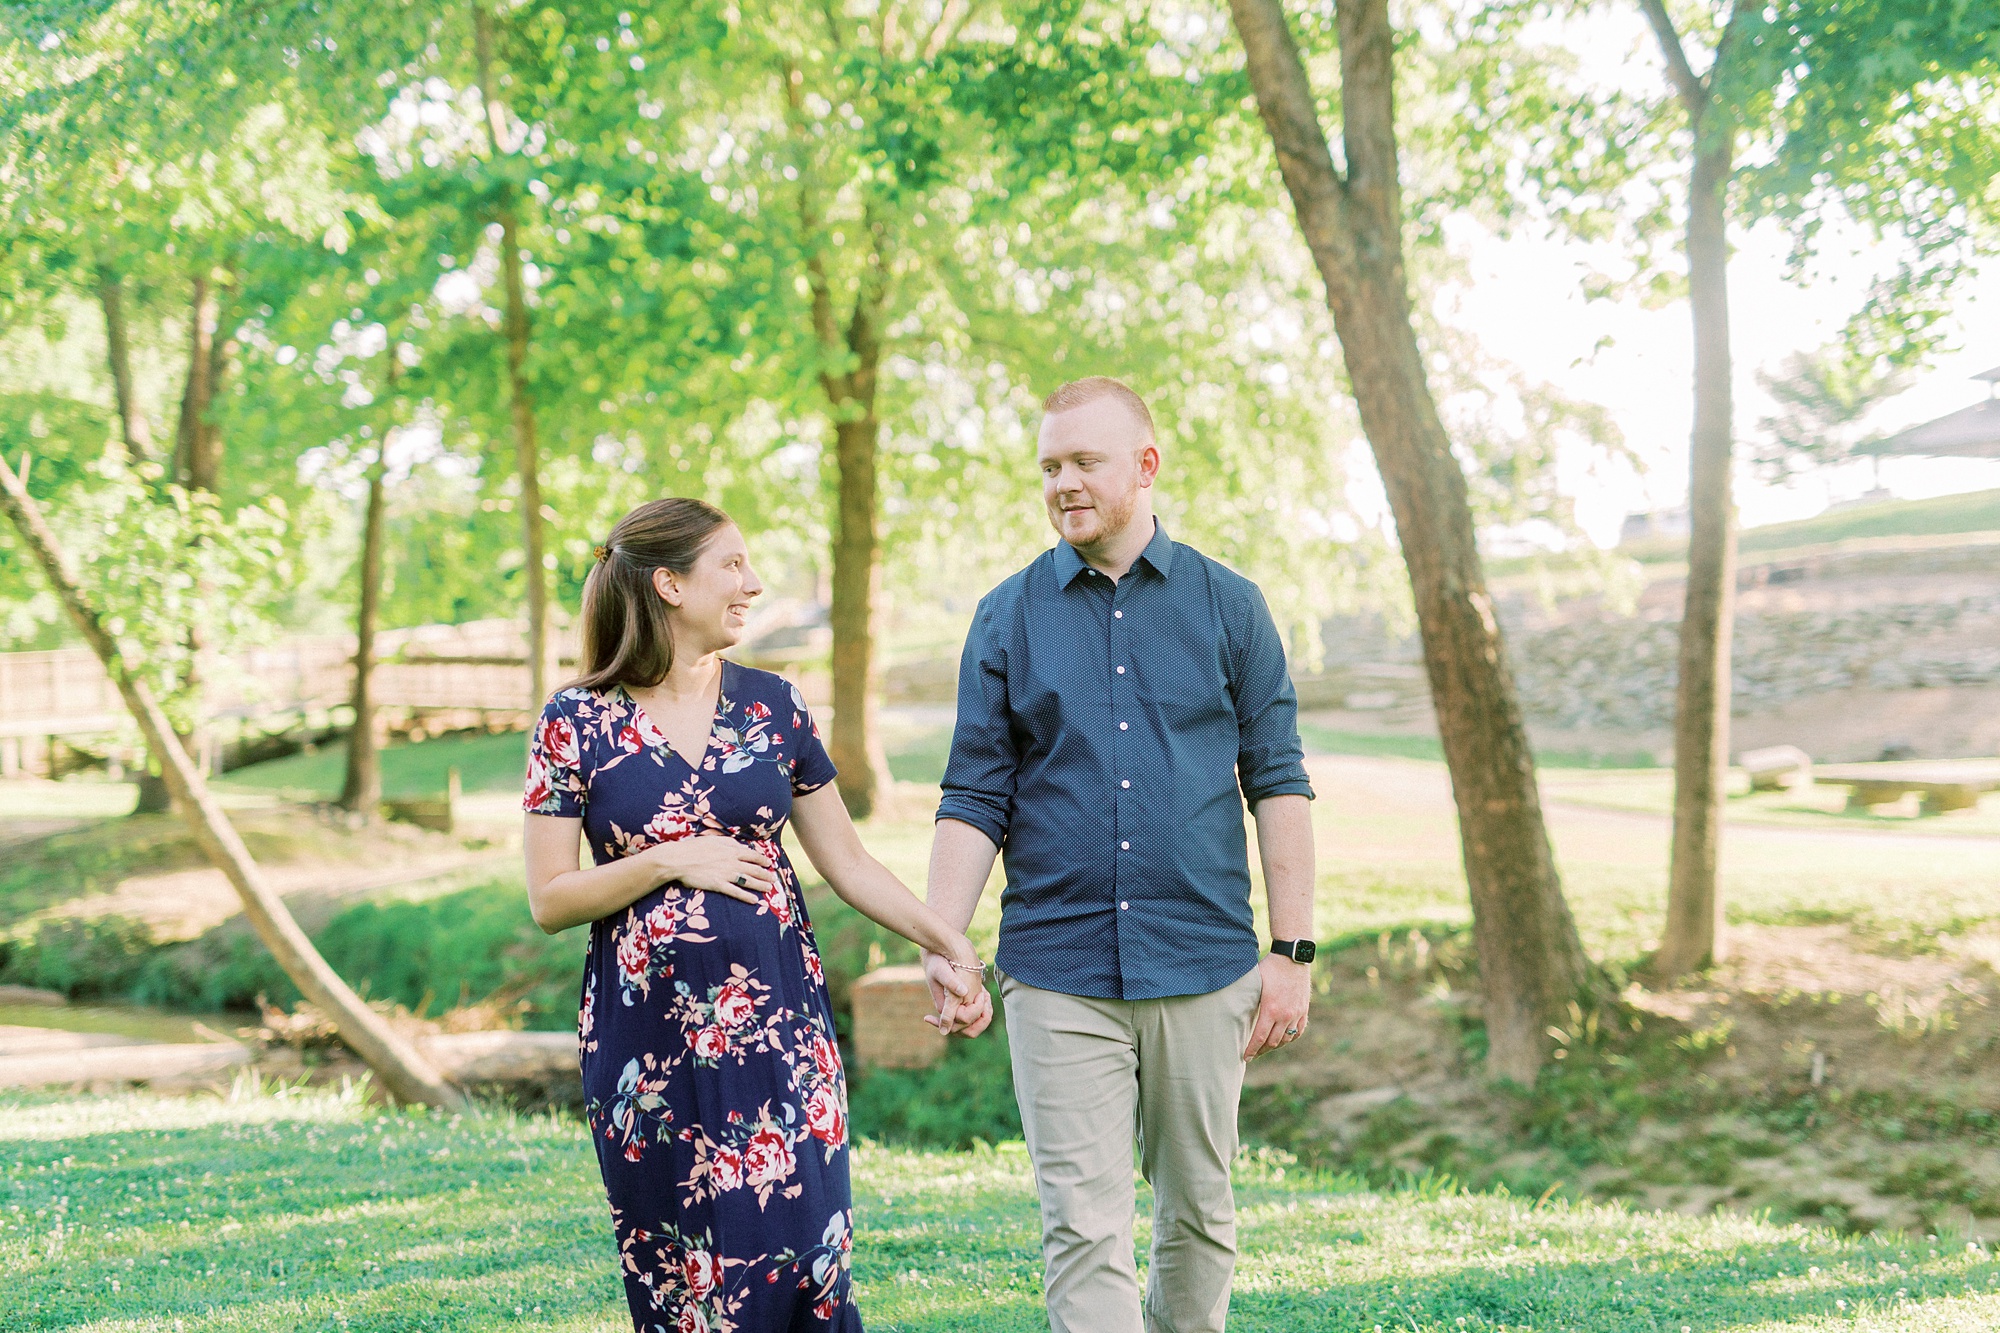 Rankin Lake Park maternity session for couple in blue outfits